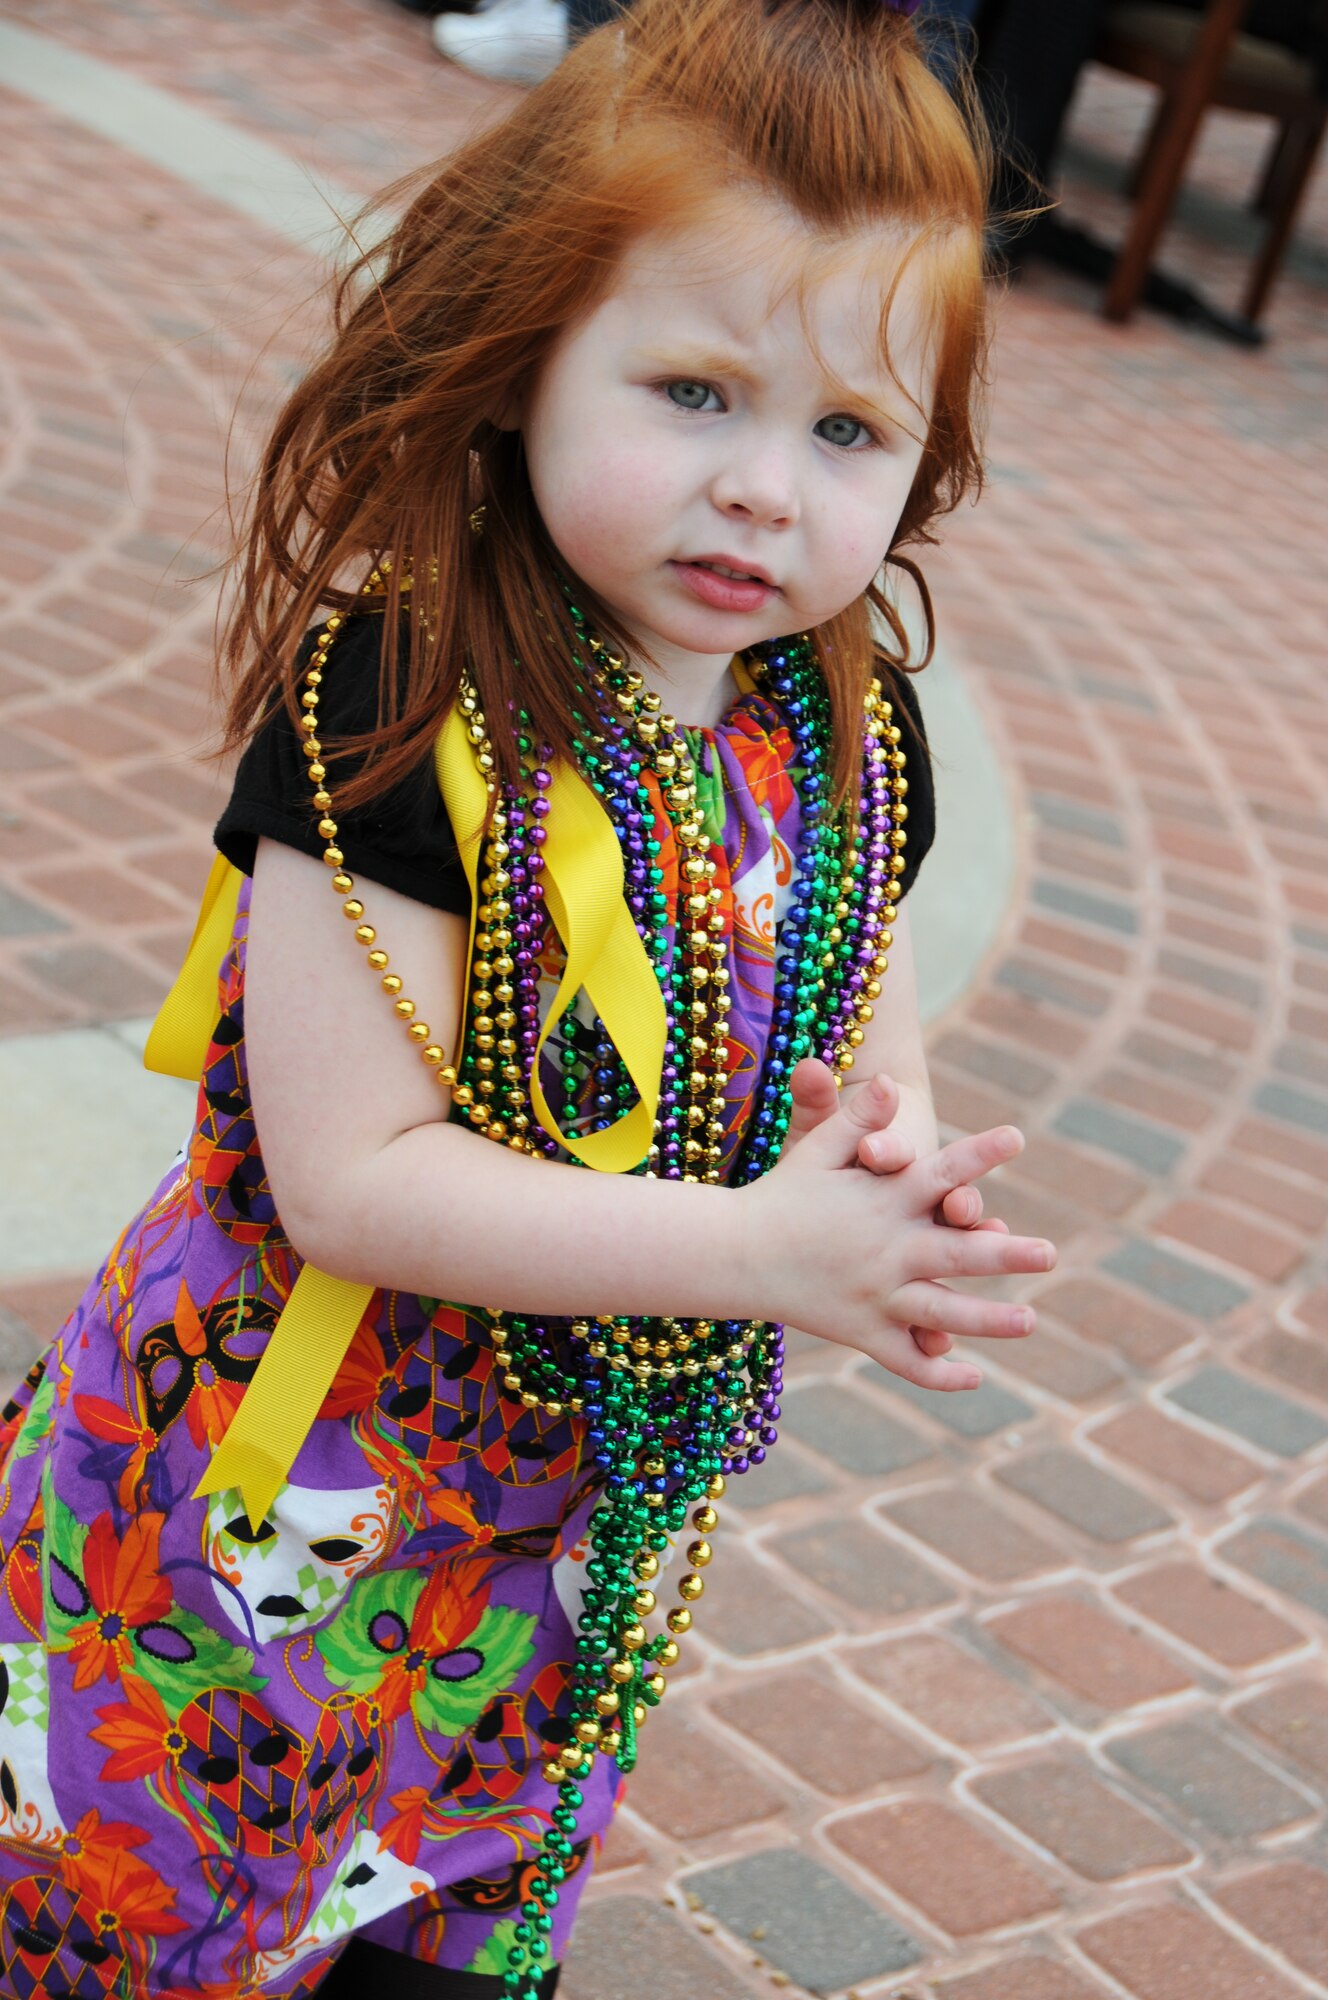 Three-year-old Madalyn Cooper, daughter of Tech. Sgt. Stephen and Tonya Cooper, 336th Training Squadron, waits for more floats to pass during the 81st Training Group Mardi Gras parade Feb. 10, 2012, between Thomson Hall and Matero Hall at Keesler Air Force Base, Biloxi, Miss.  (U.S. Air Force photo by Kemberly Groue)